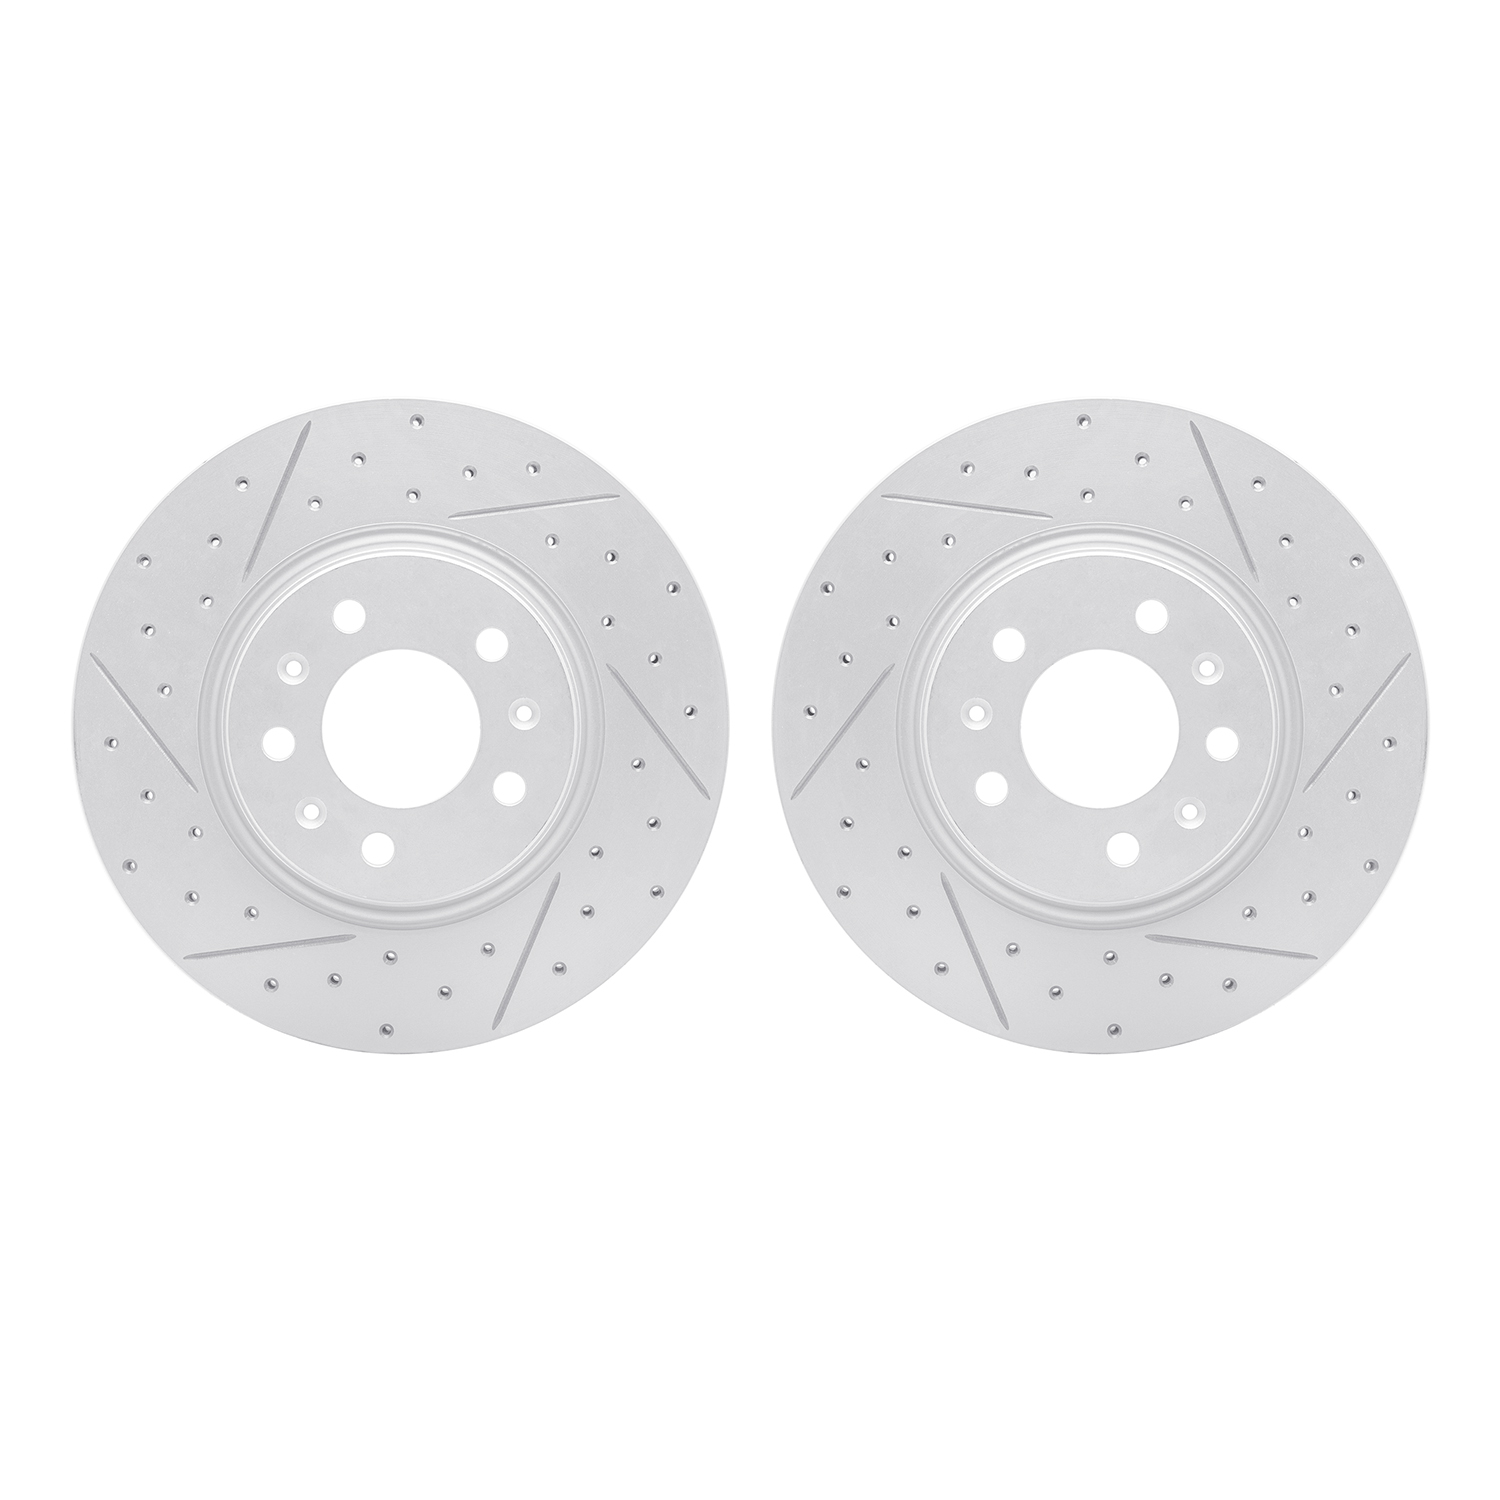 2002-53002 Geoperformance Drilled/Slotted Brake Rotors, 2006-2010 GM, Position: Front